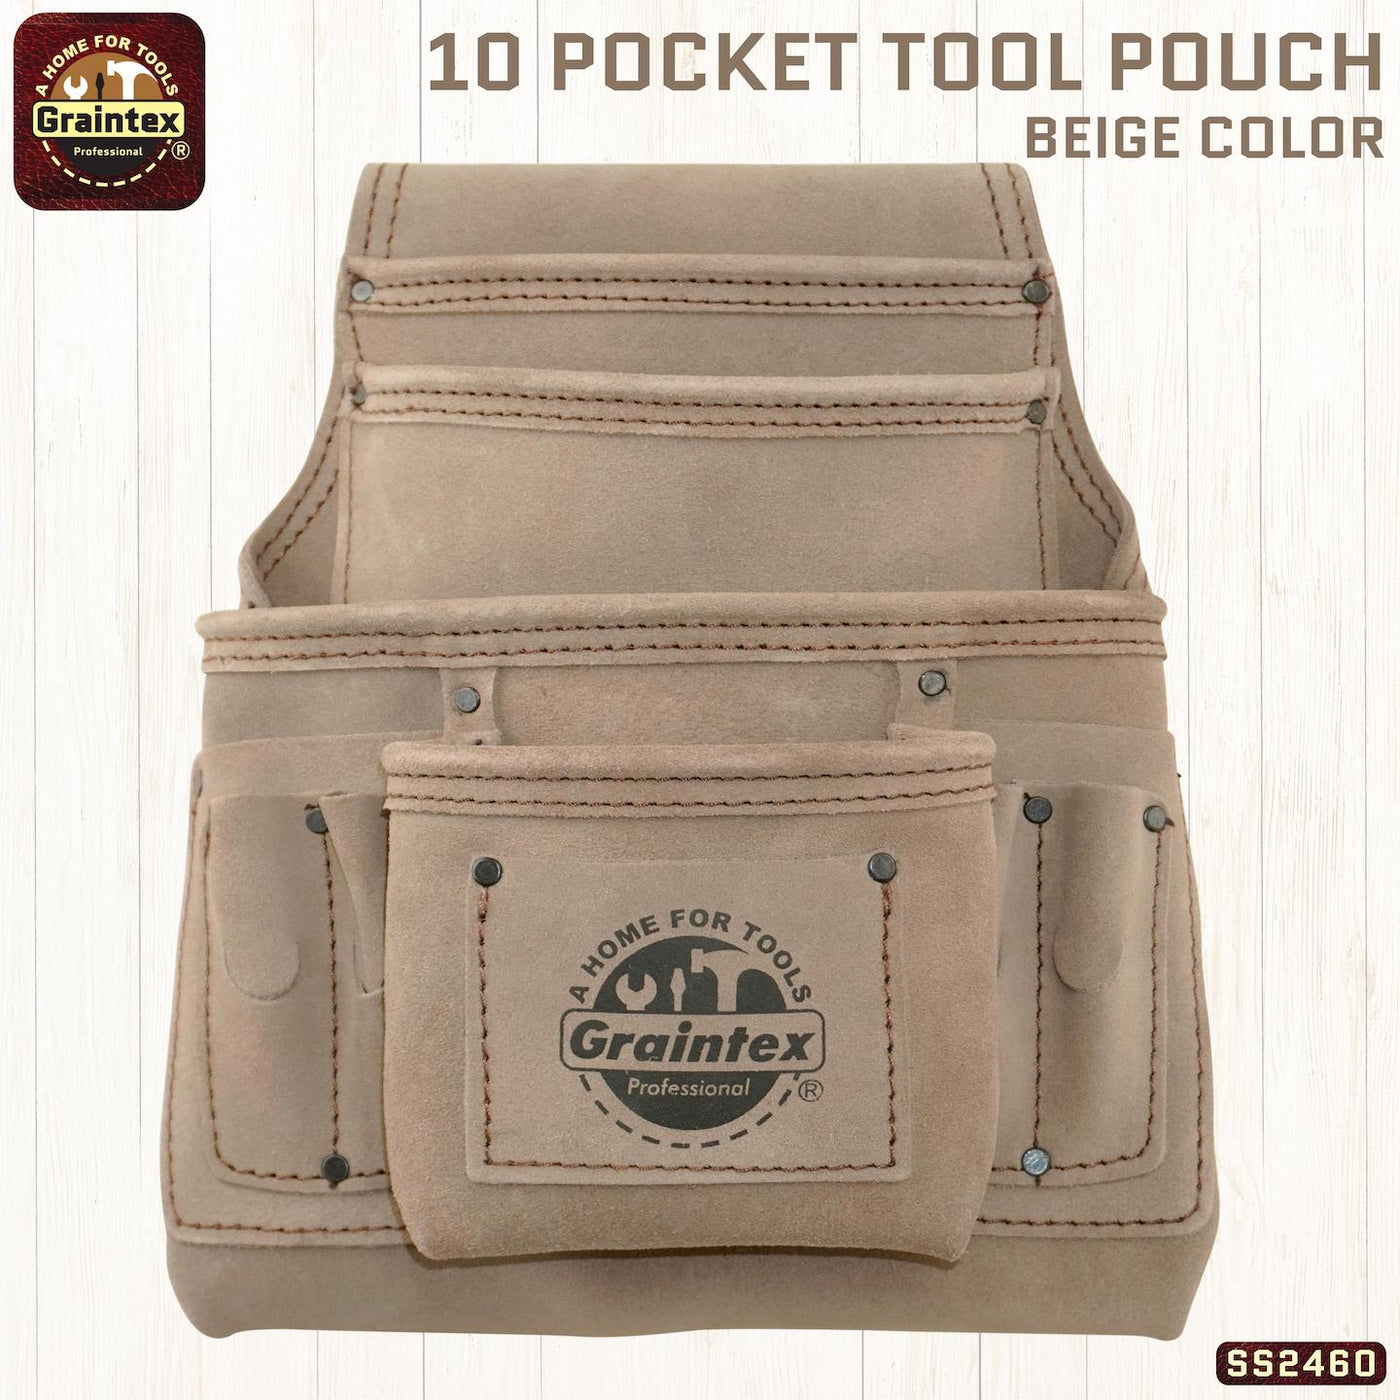 SS2460 :: 10 Pocket Nail & Tool Pouch Beige Color Suede Leather